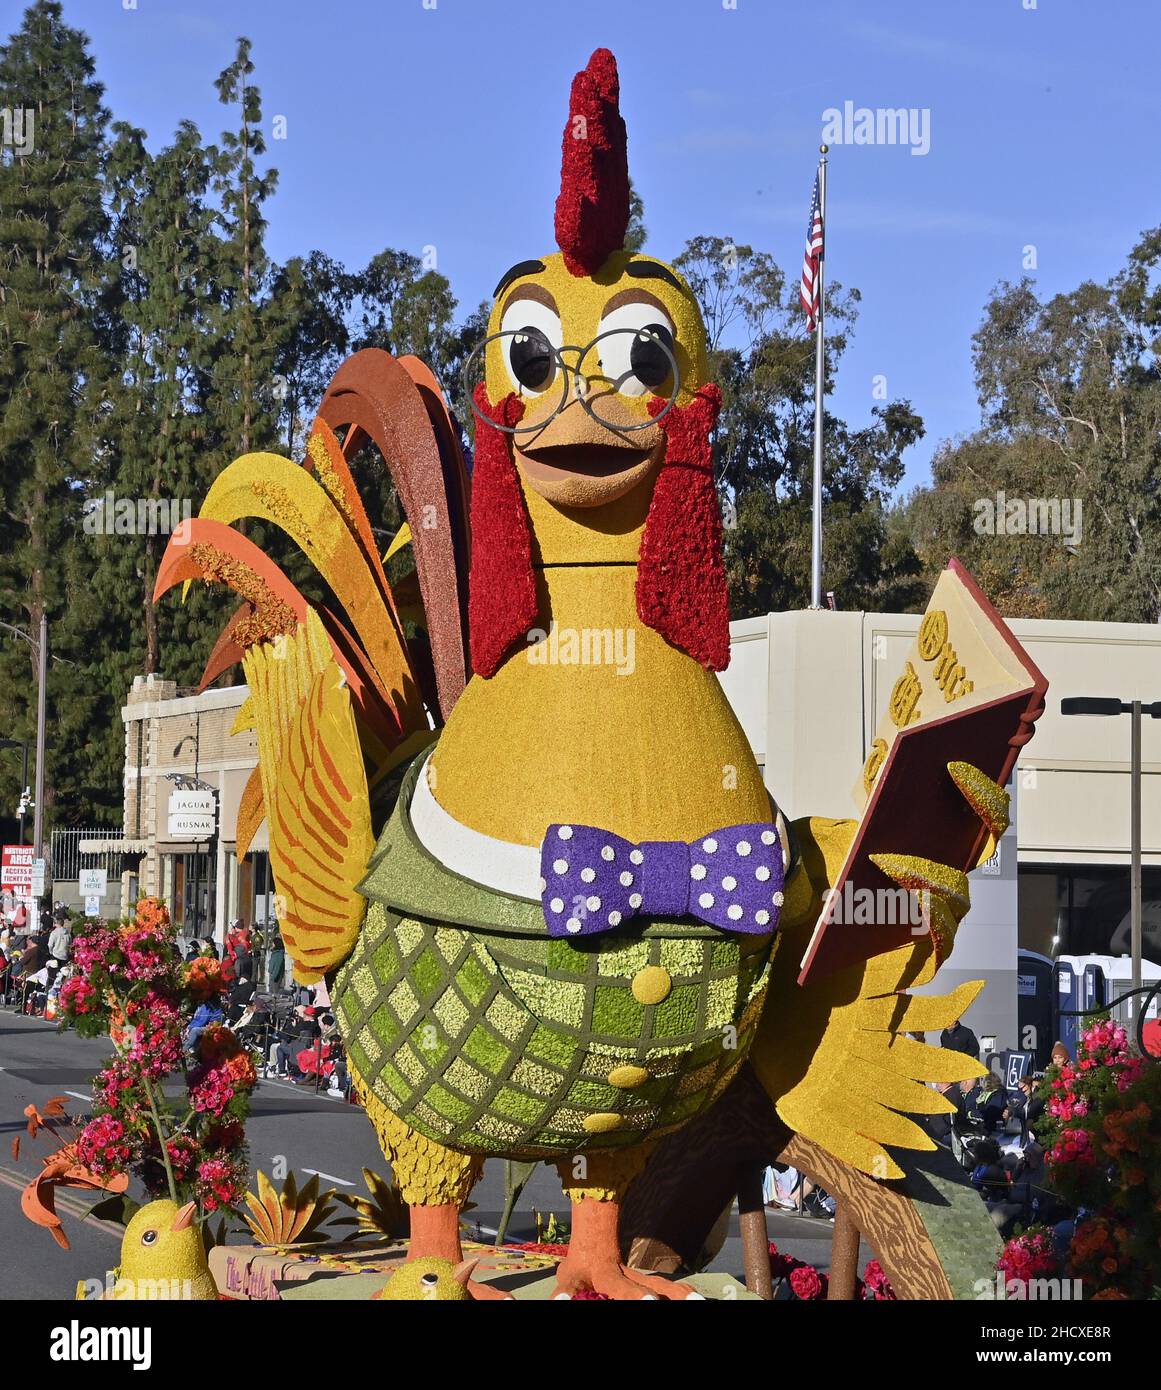 Pasadena, United States. 01st Jan, 2022. The UPS Store's 'Rise, Shine and Read' float, winner of the 2022 Sweepstakes Trophy, makes its way down Colorado Boulevard during the 133rd annual Tournament of Roses Parade held in Pasadena, California on Saturday, January 1, 2022. Photo by Jim Ruymen/UPI. Credit: UPI/Alamy Live News Stock Photo